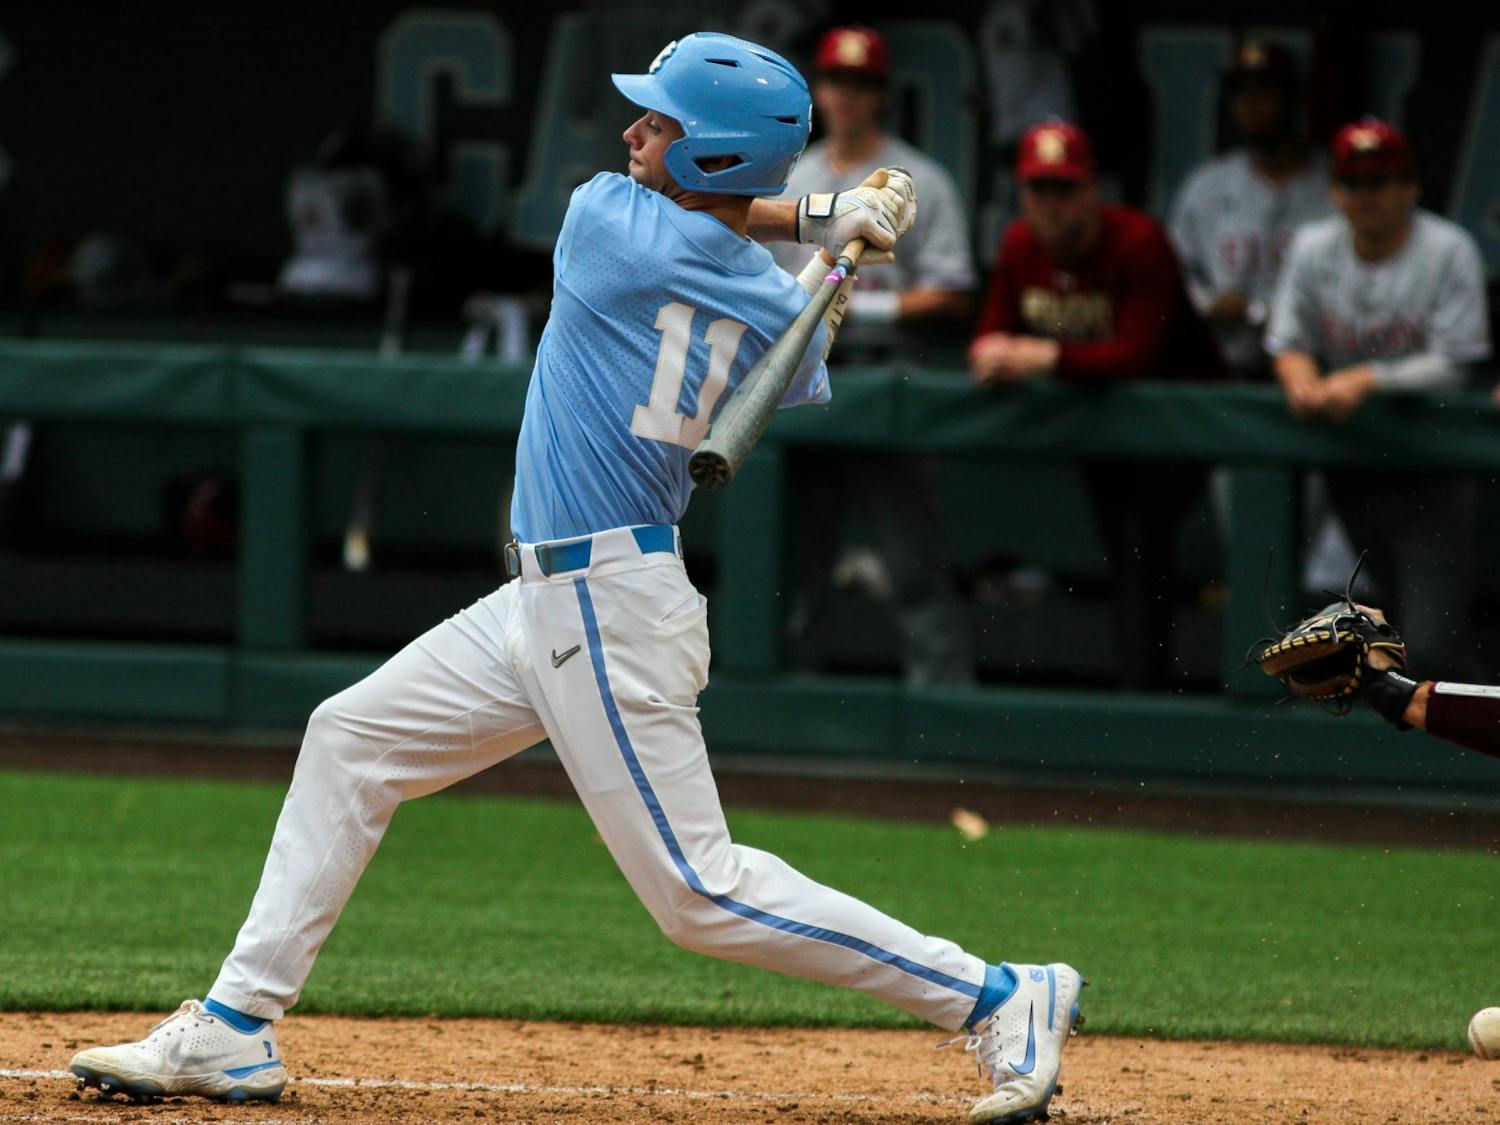 UNC first-year outfielder Reece Holbrook (11) offers at a pitch during the game against Elon on Tuesday, Feb. 22, 2022, at Boshamer Stadium. UNC won 5-1.